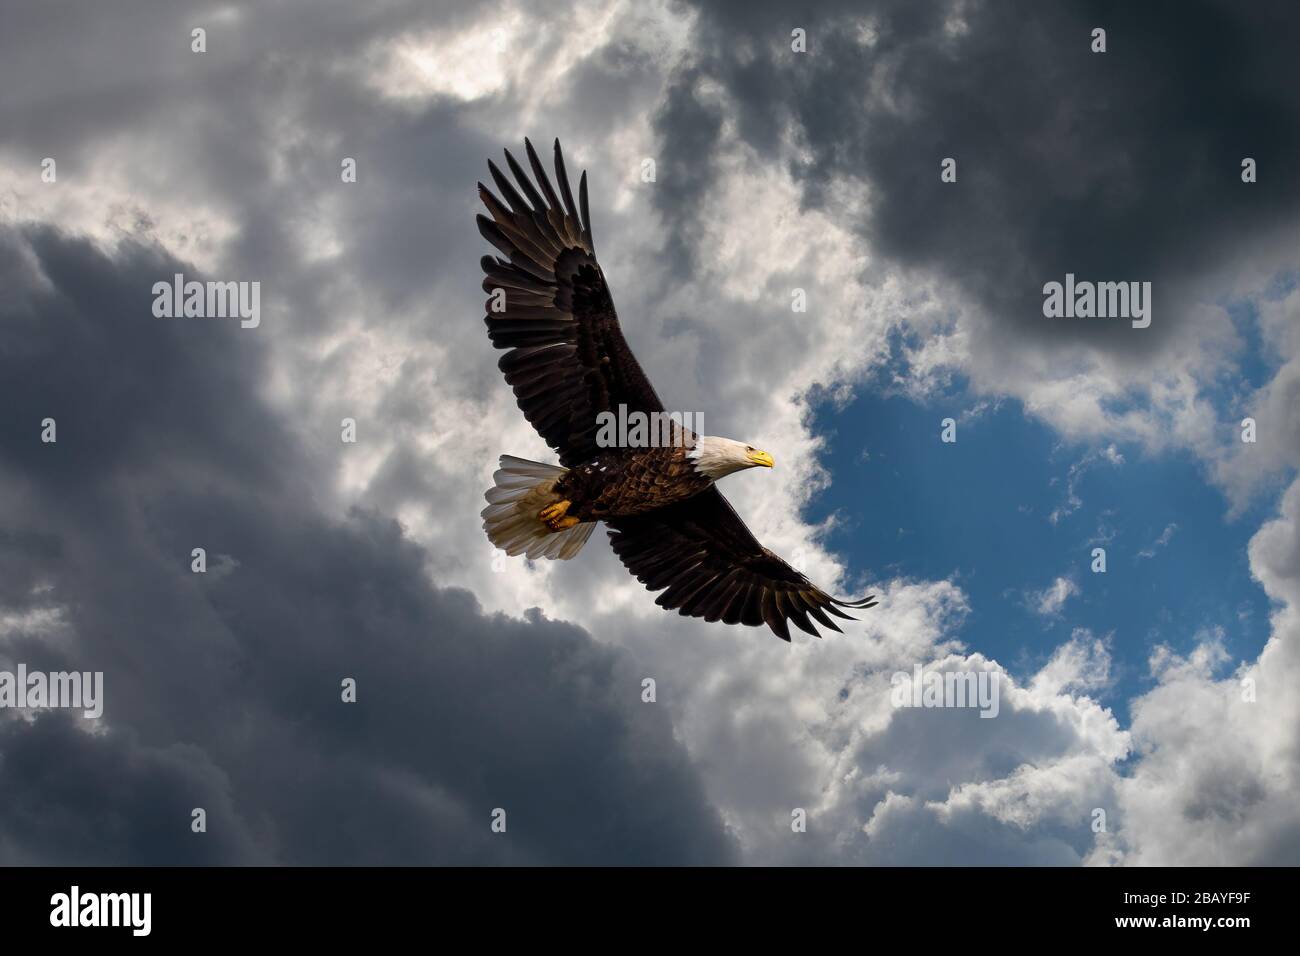 Bald Eagle flying against a cloudy sky. Stock Photo